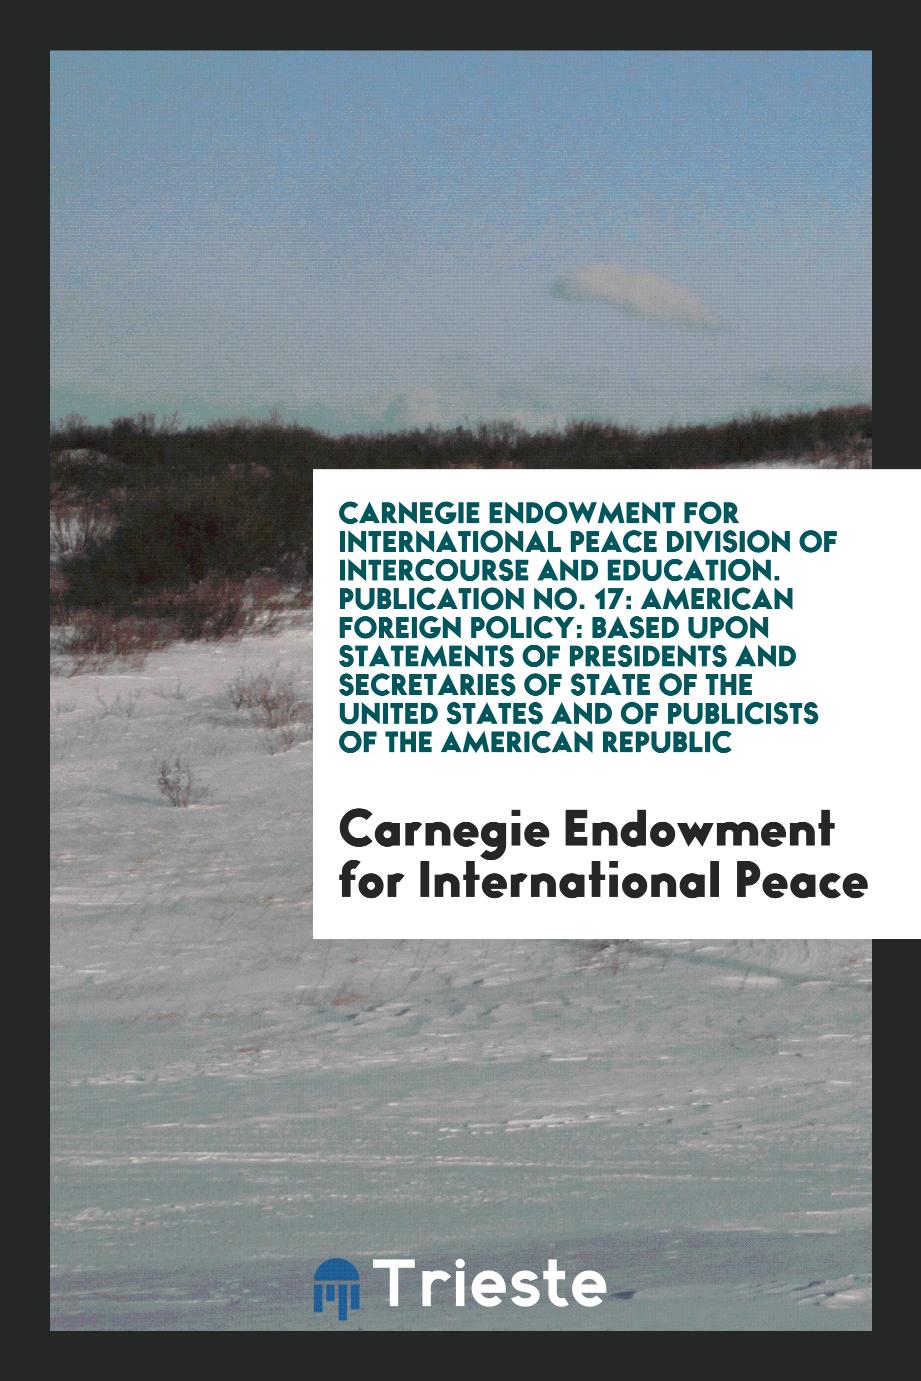 Carnegie Endowment for International Peace Division of Intercourse and Education. Publication No. 17: American Foreign Policy: Based upon Statements of Presidents and Secretaries of State of the United States and of Publicists of the American Republic